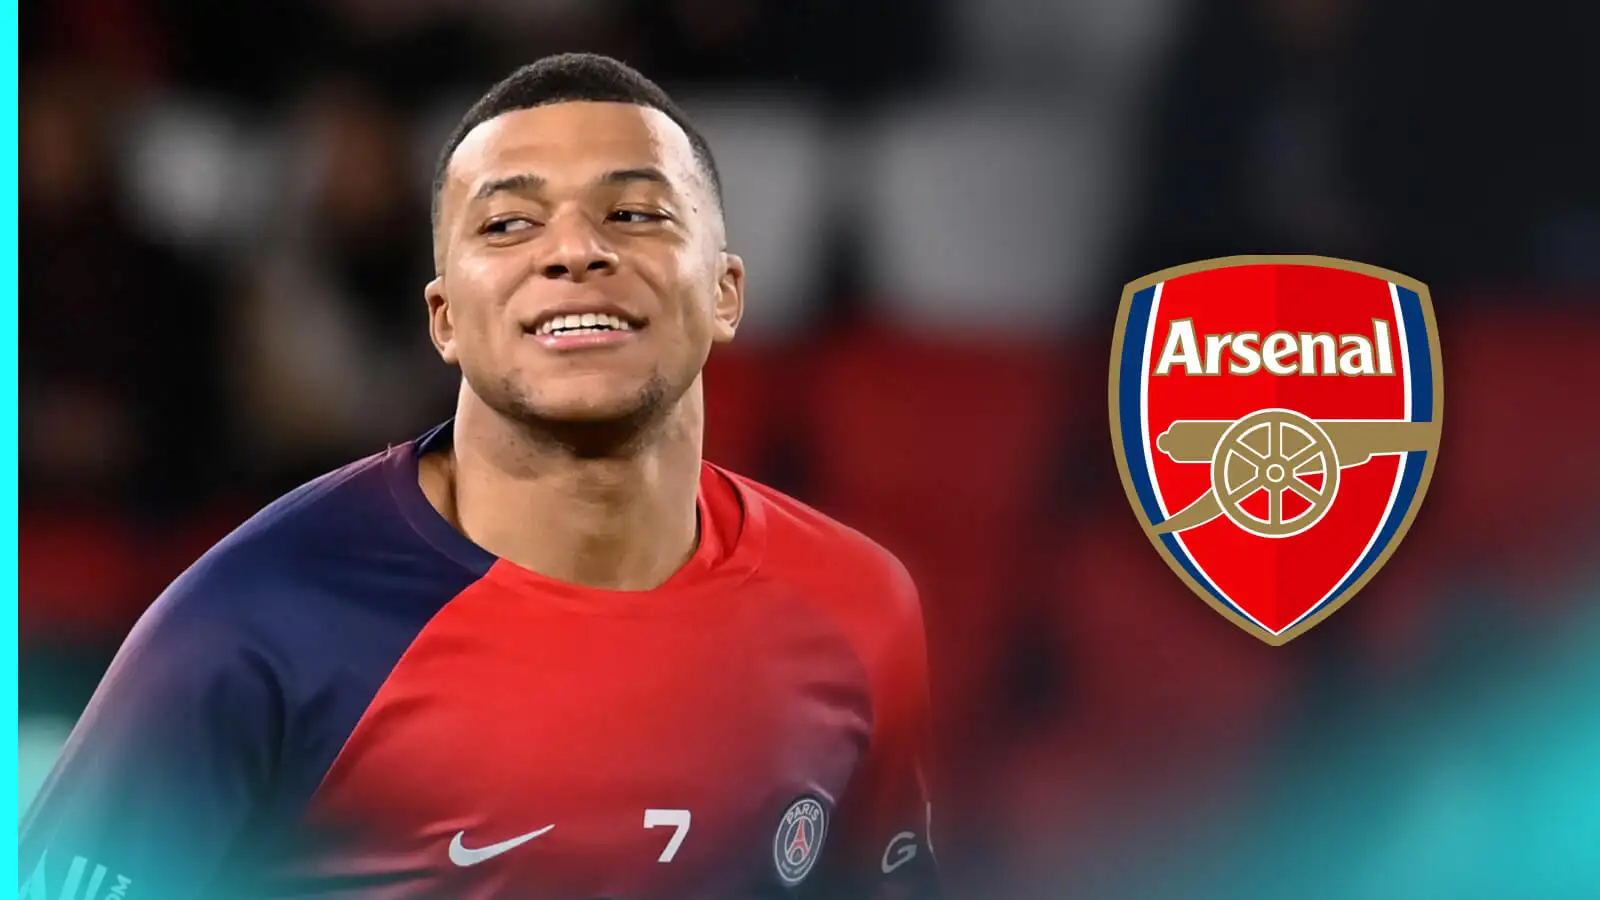 Kylian Mbappe and also an Arsenal badge